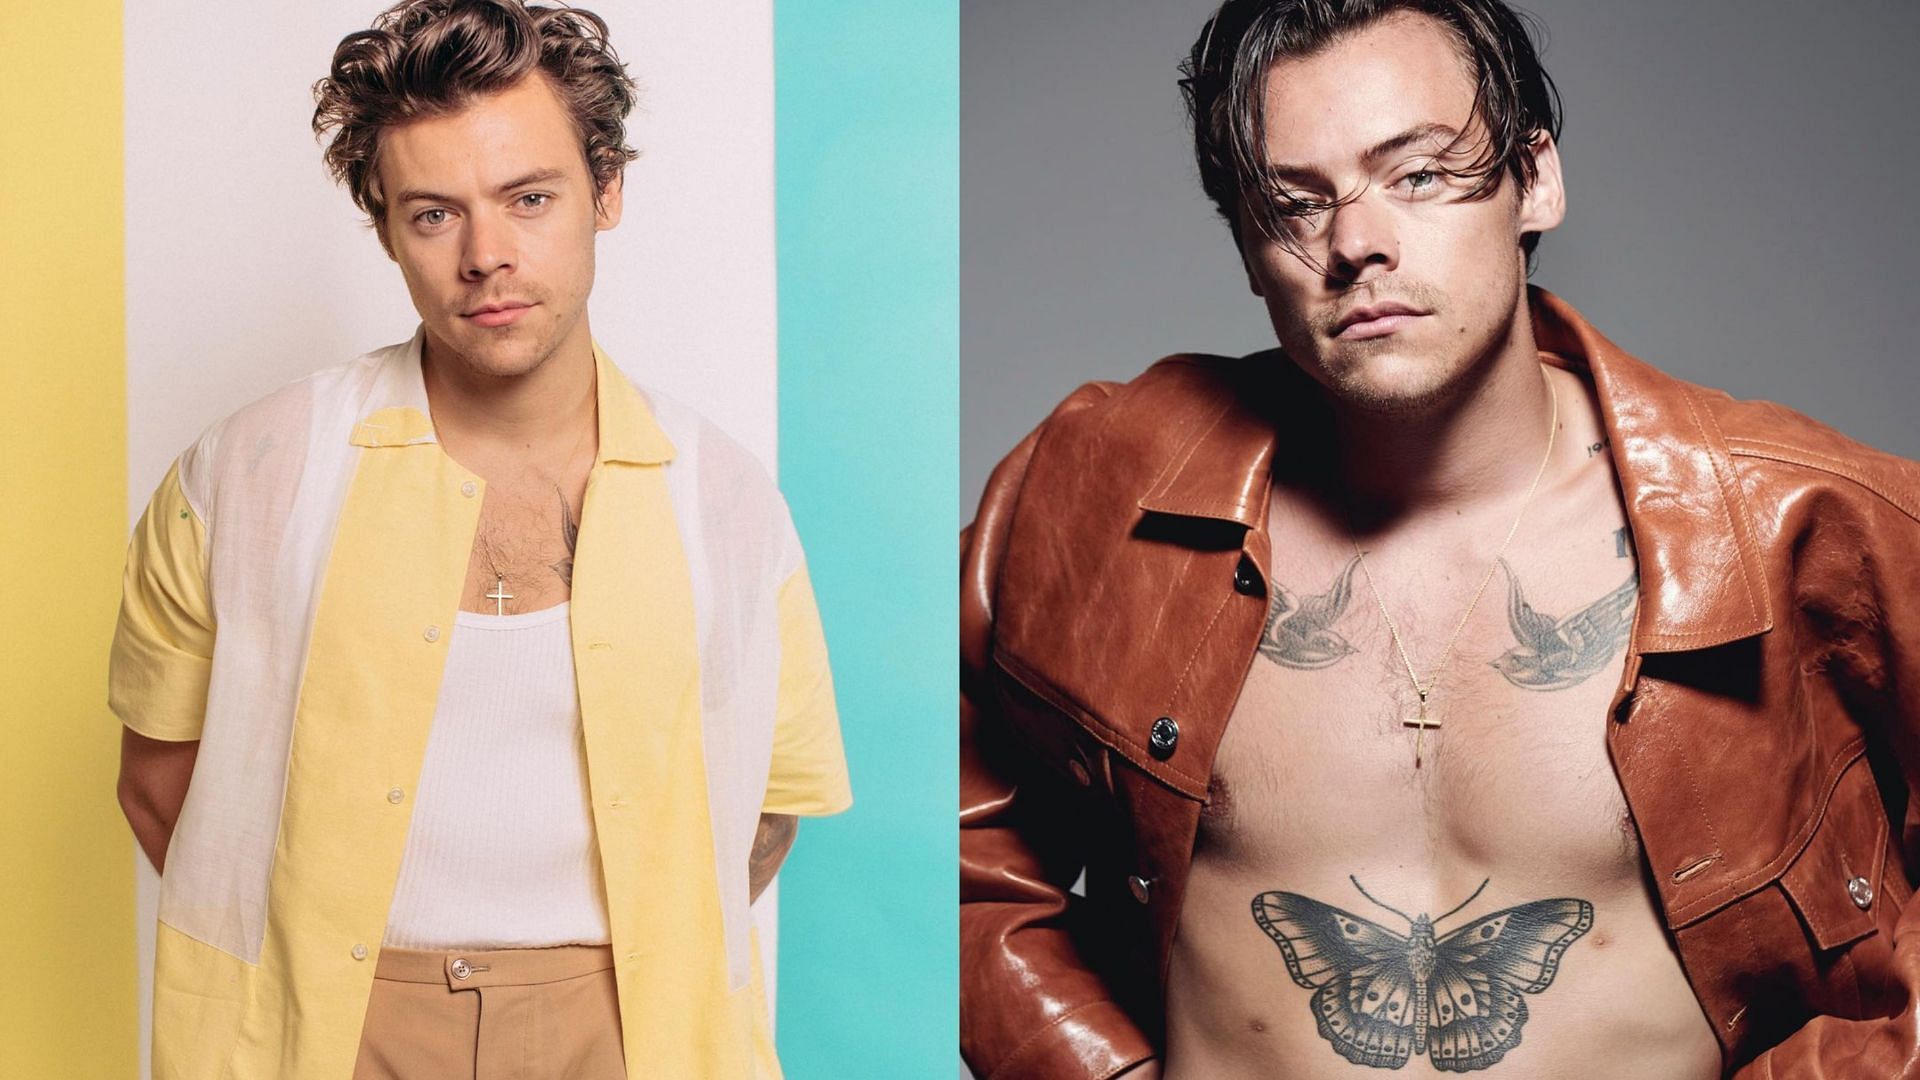 Harry Styles started doing Pilates to improve his posture (Image via Instagram)